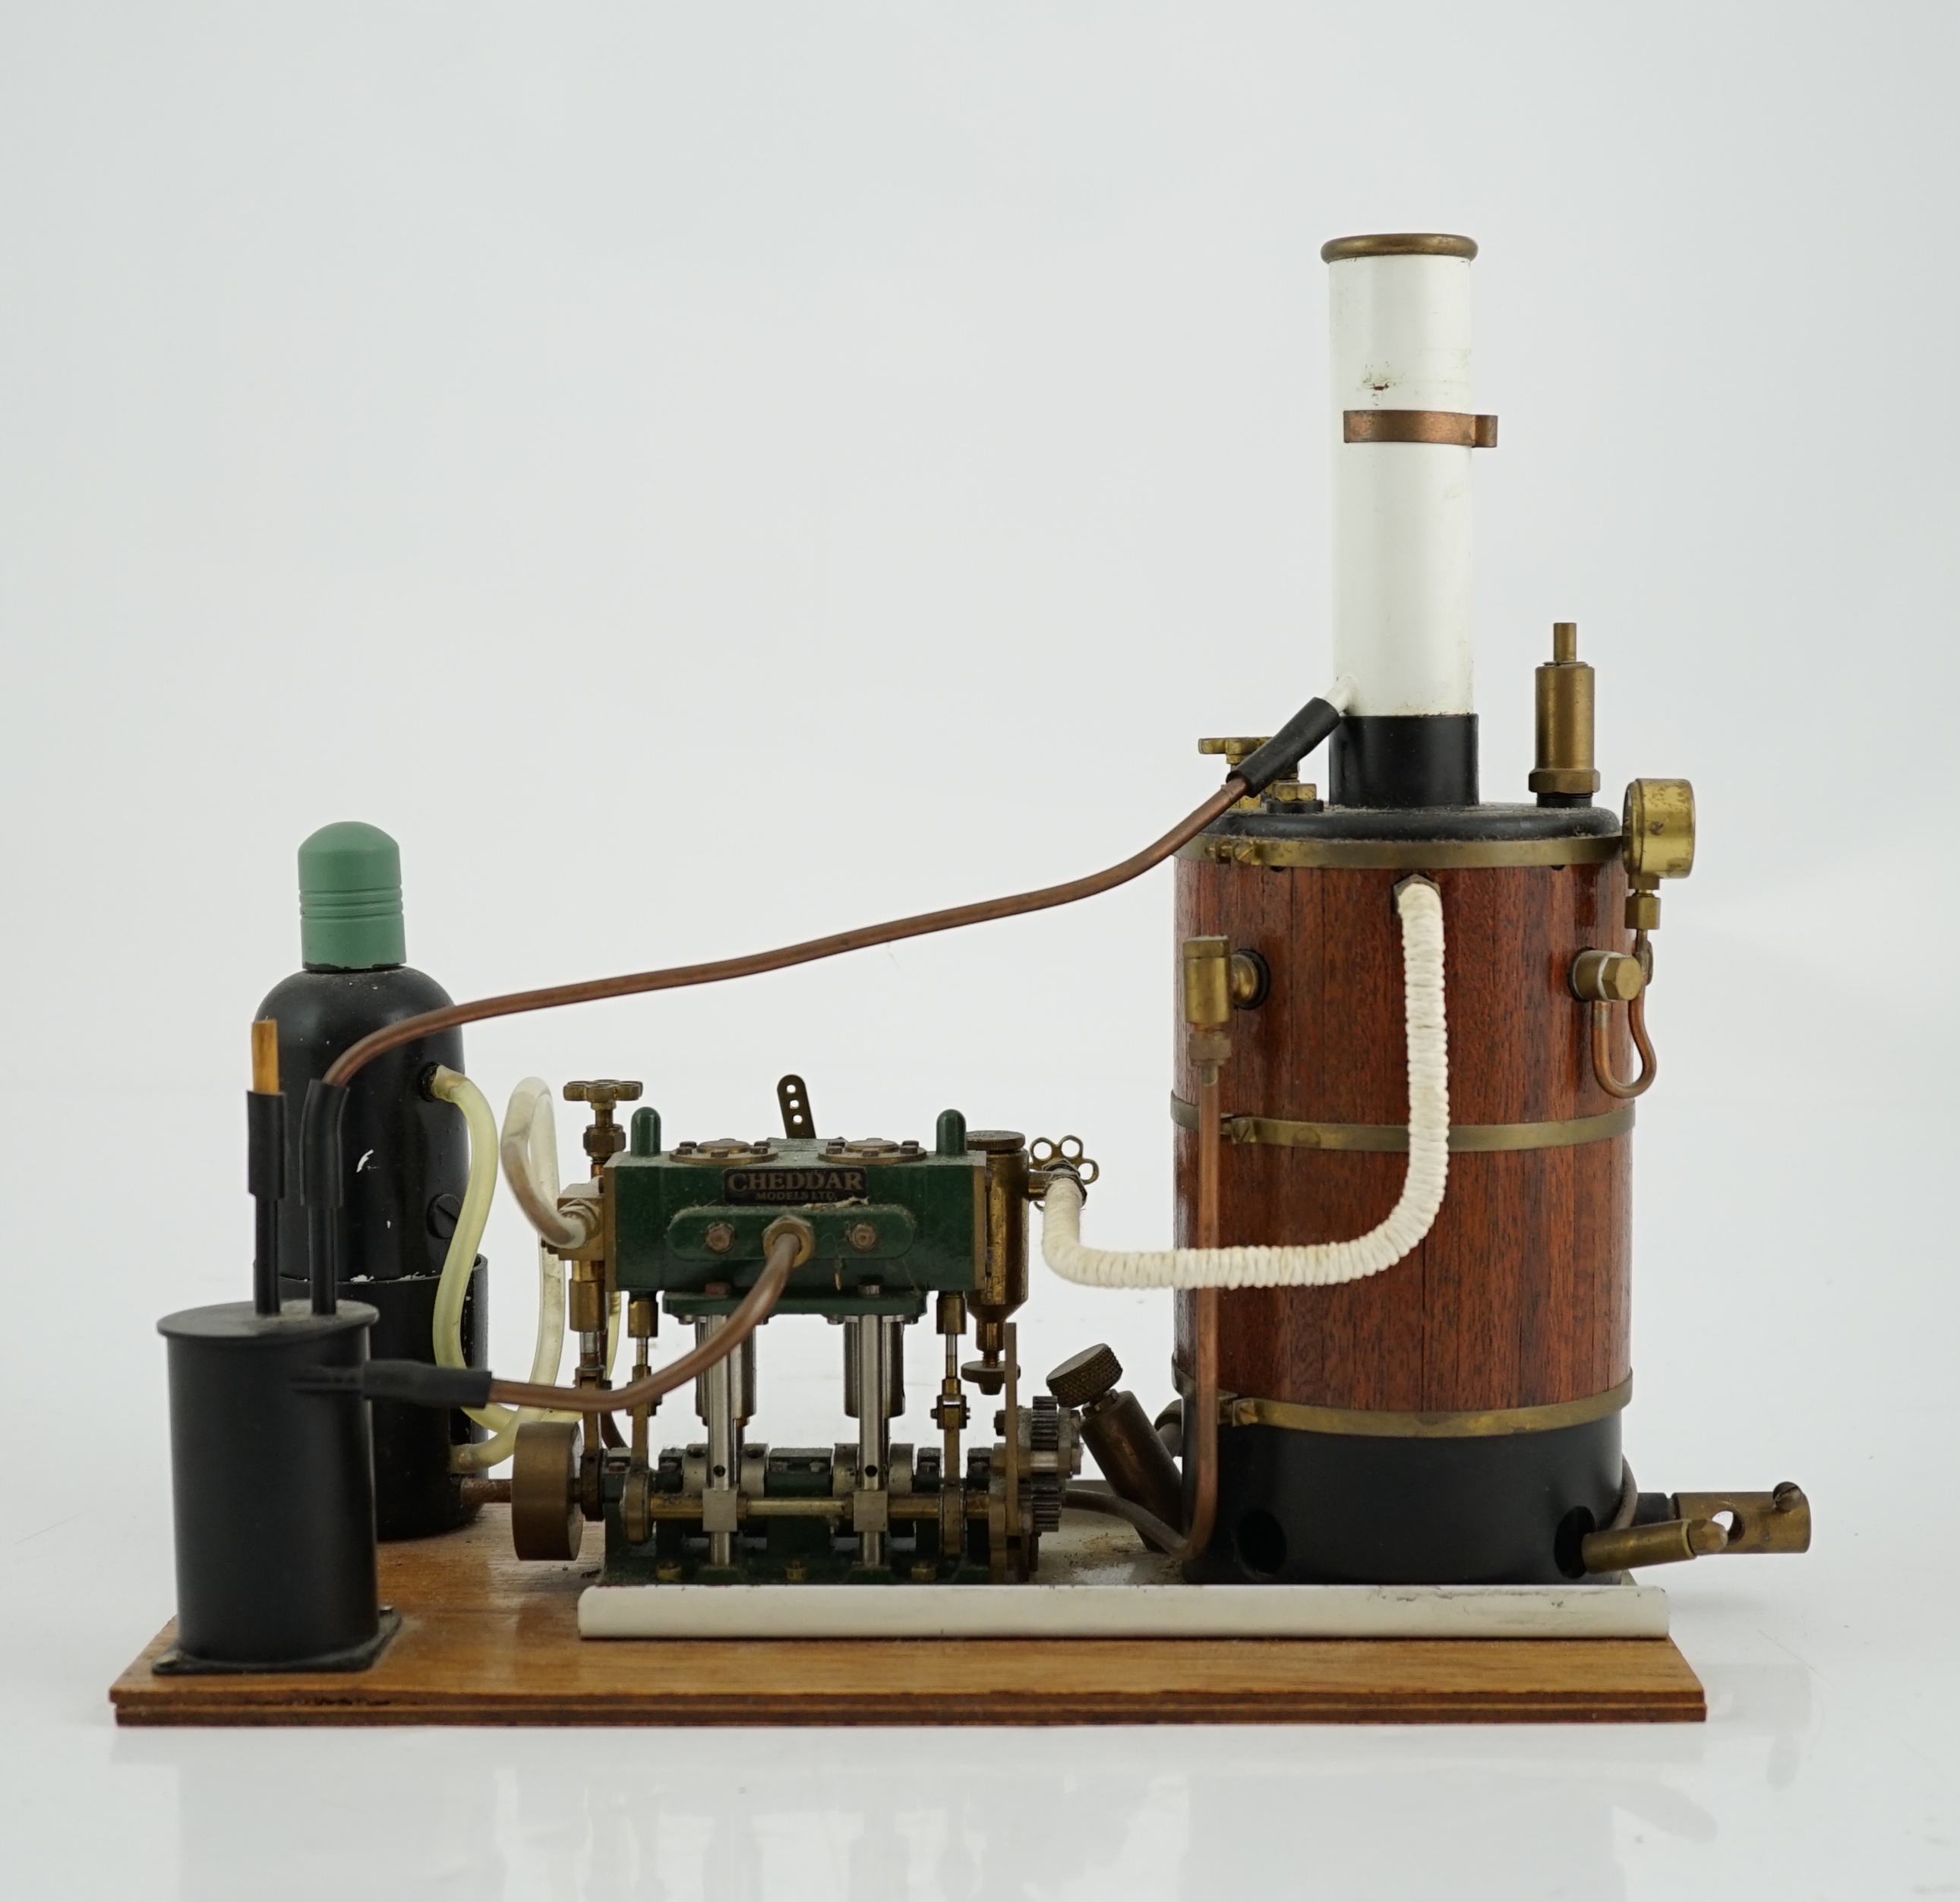 A Cheddar Models Ltd. Proteus steam plant, a gas fired vertical boiler two cylinder marine engine, - Image 5 of 8